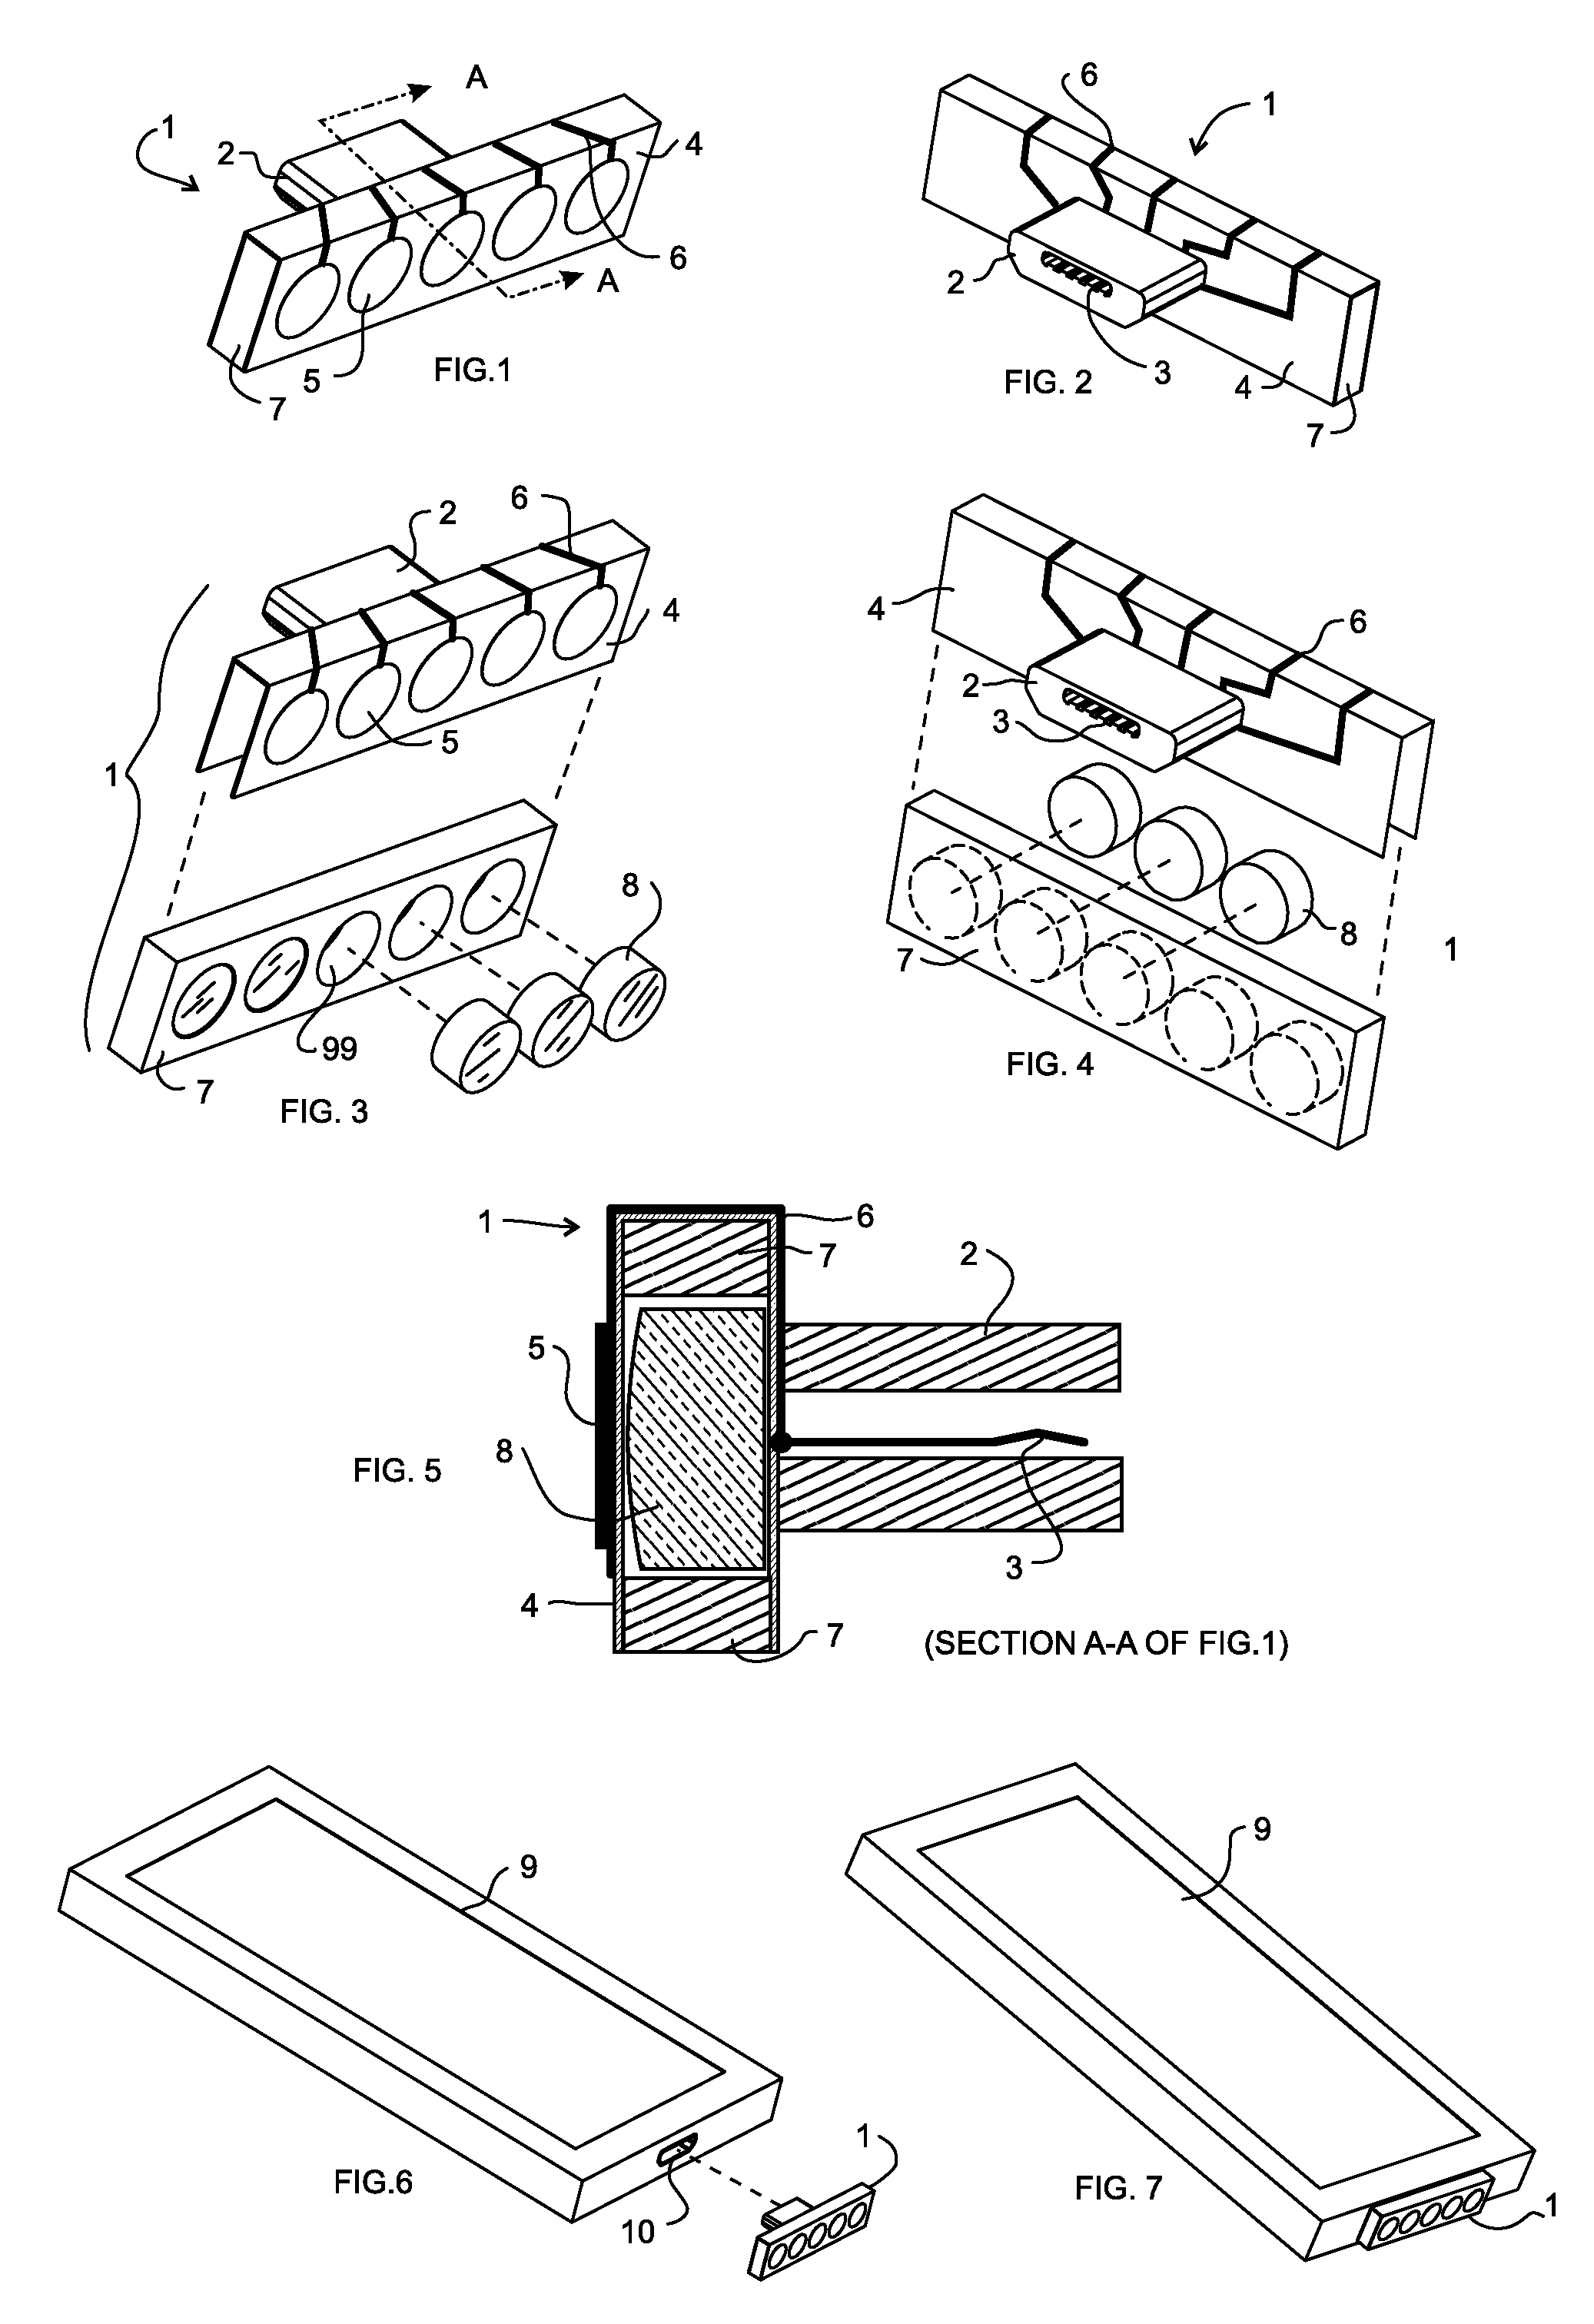 Interposer connectors with magnetic components